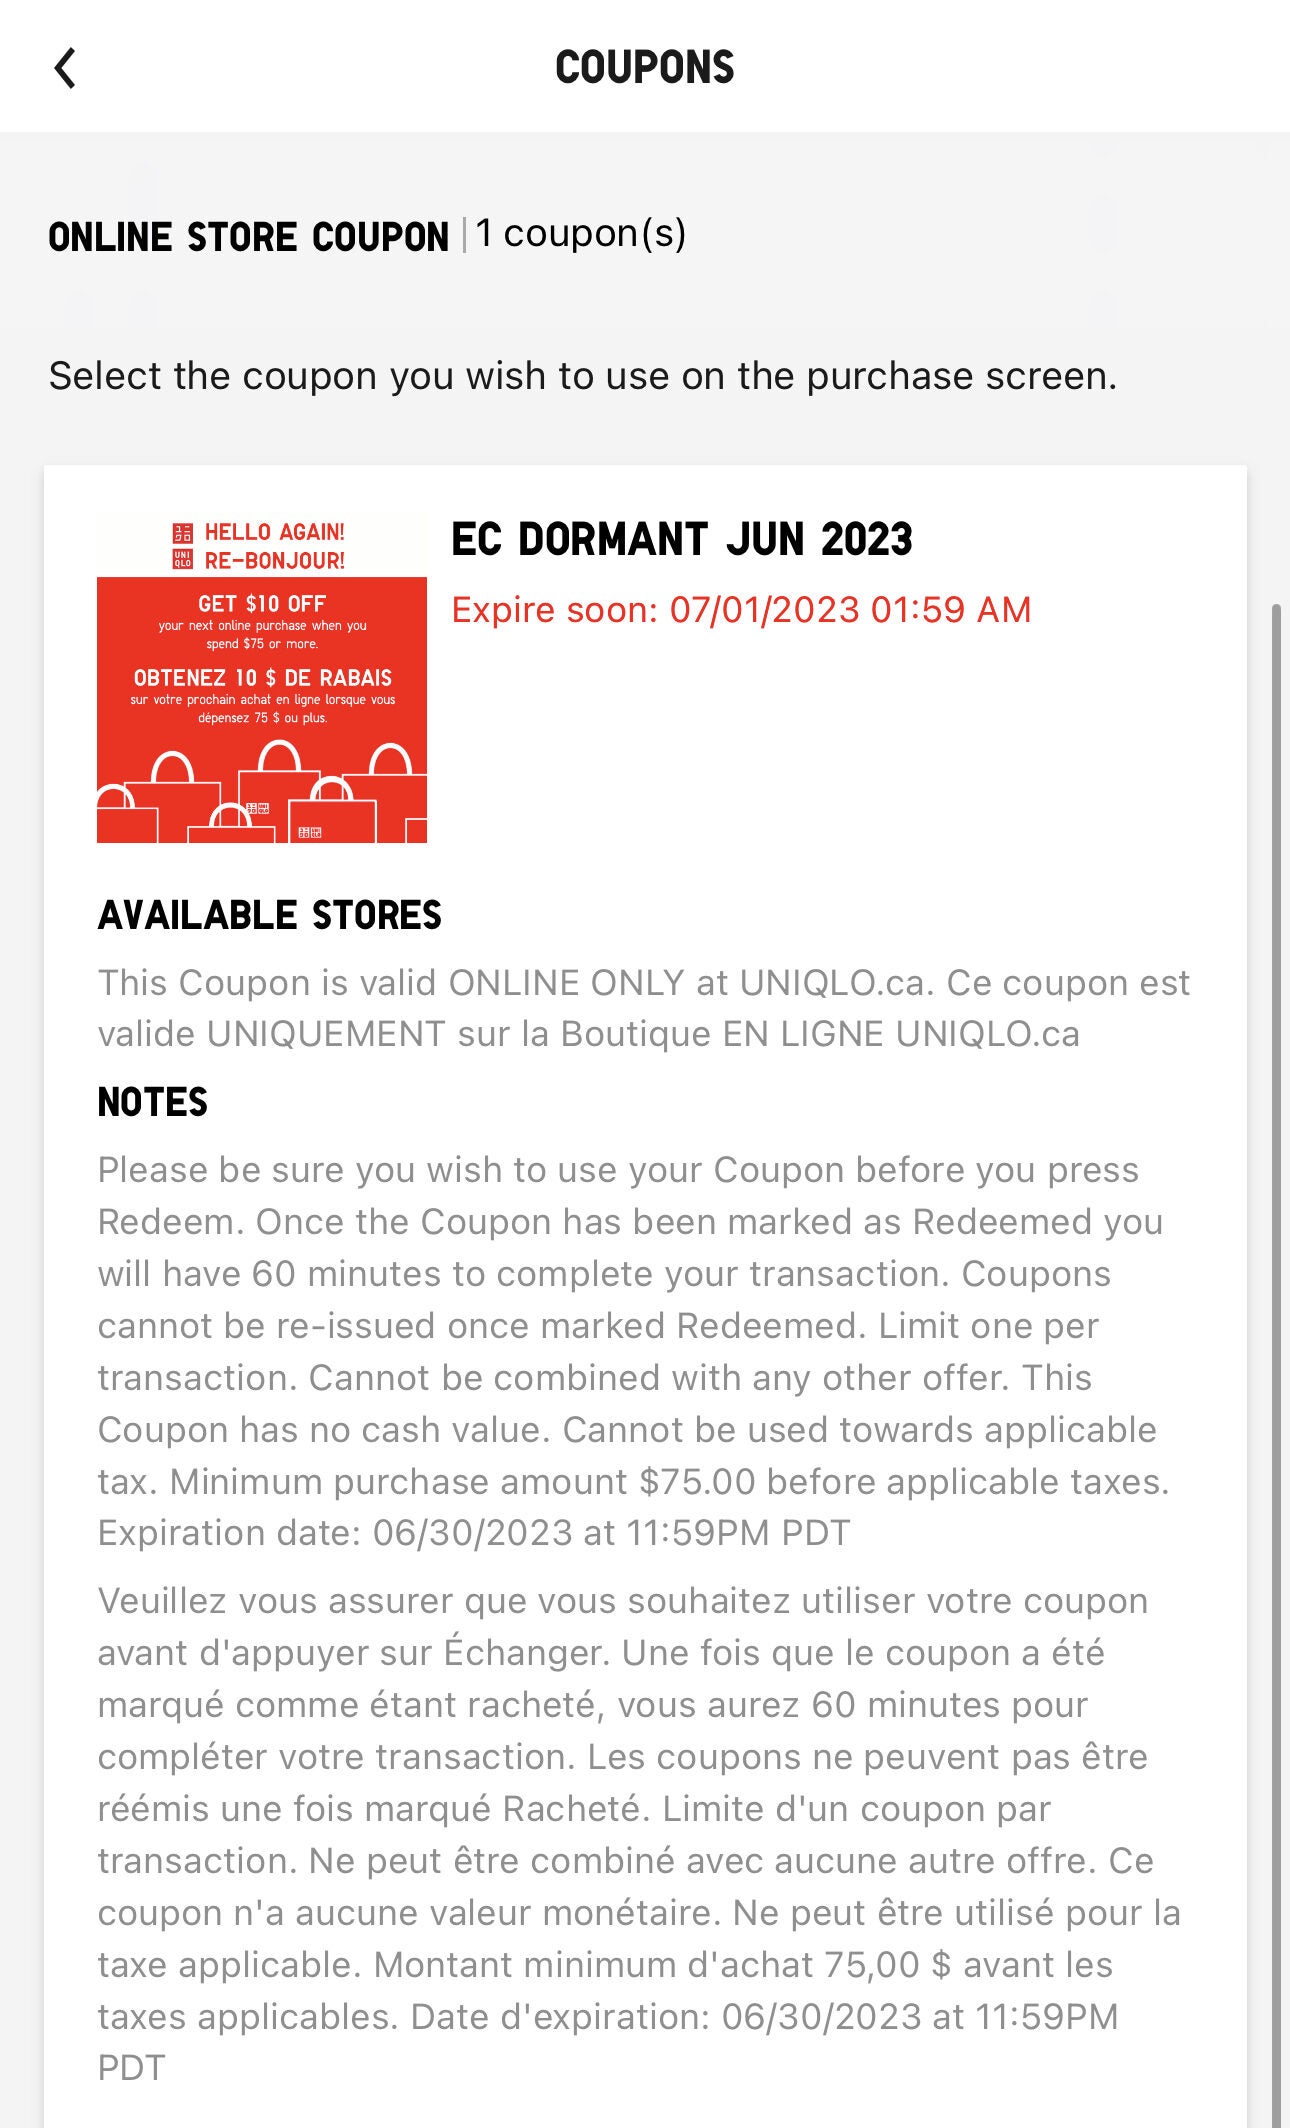 UNIQLO India Coupons Promo Codes  Up to 60 Off July 2023